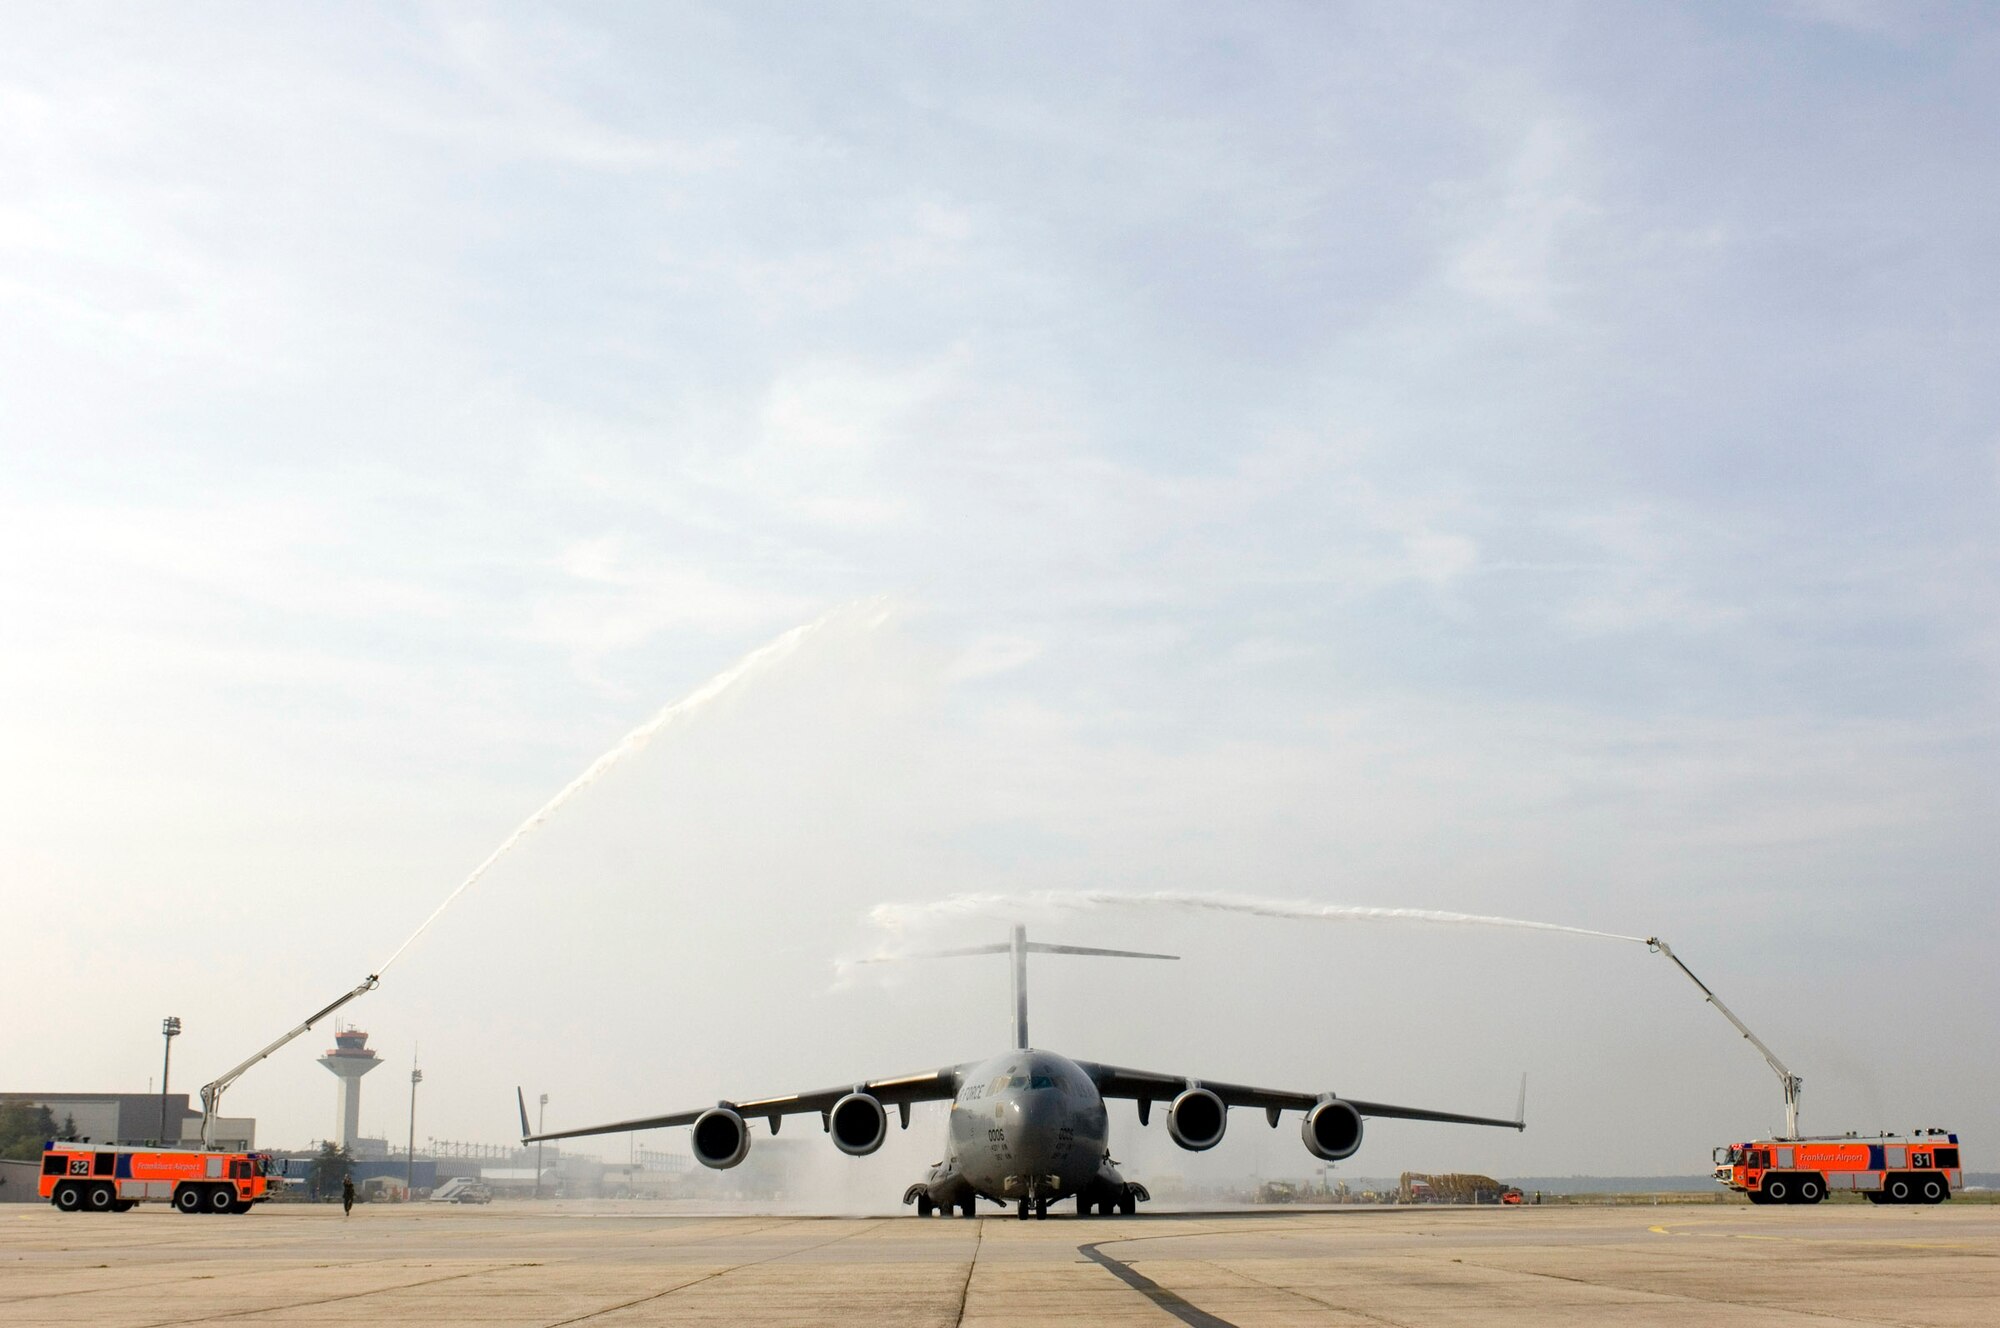 RHEIN-MAIN AIR BASE, Germany -- A C-17 Globemaster III, christened the "Spirit of Berlin," taxis for the final flight from this airlift base. The flight ended the ceremonial closing of the base, the Air Force's longtime "Gateway to Europe." The Air Force will turn the base over to the Frankfurt Airport Authority in December, 60 years after operations started here. (U.S. Air Force photo by Master Sgt. John E. Lasky) 